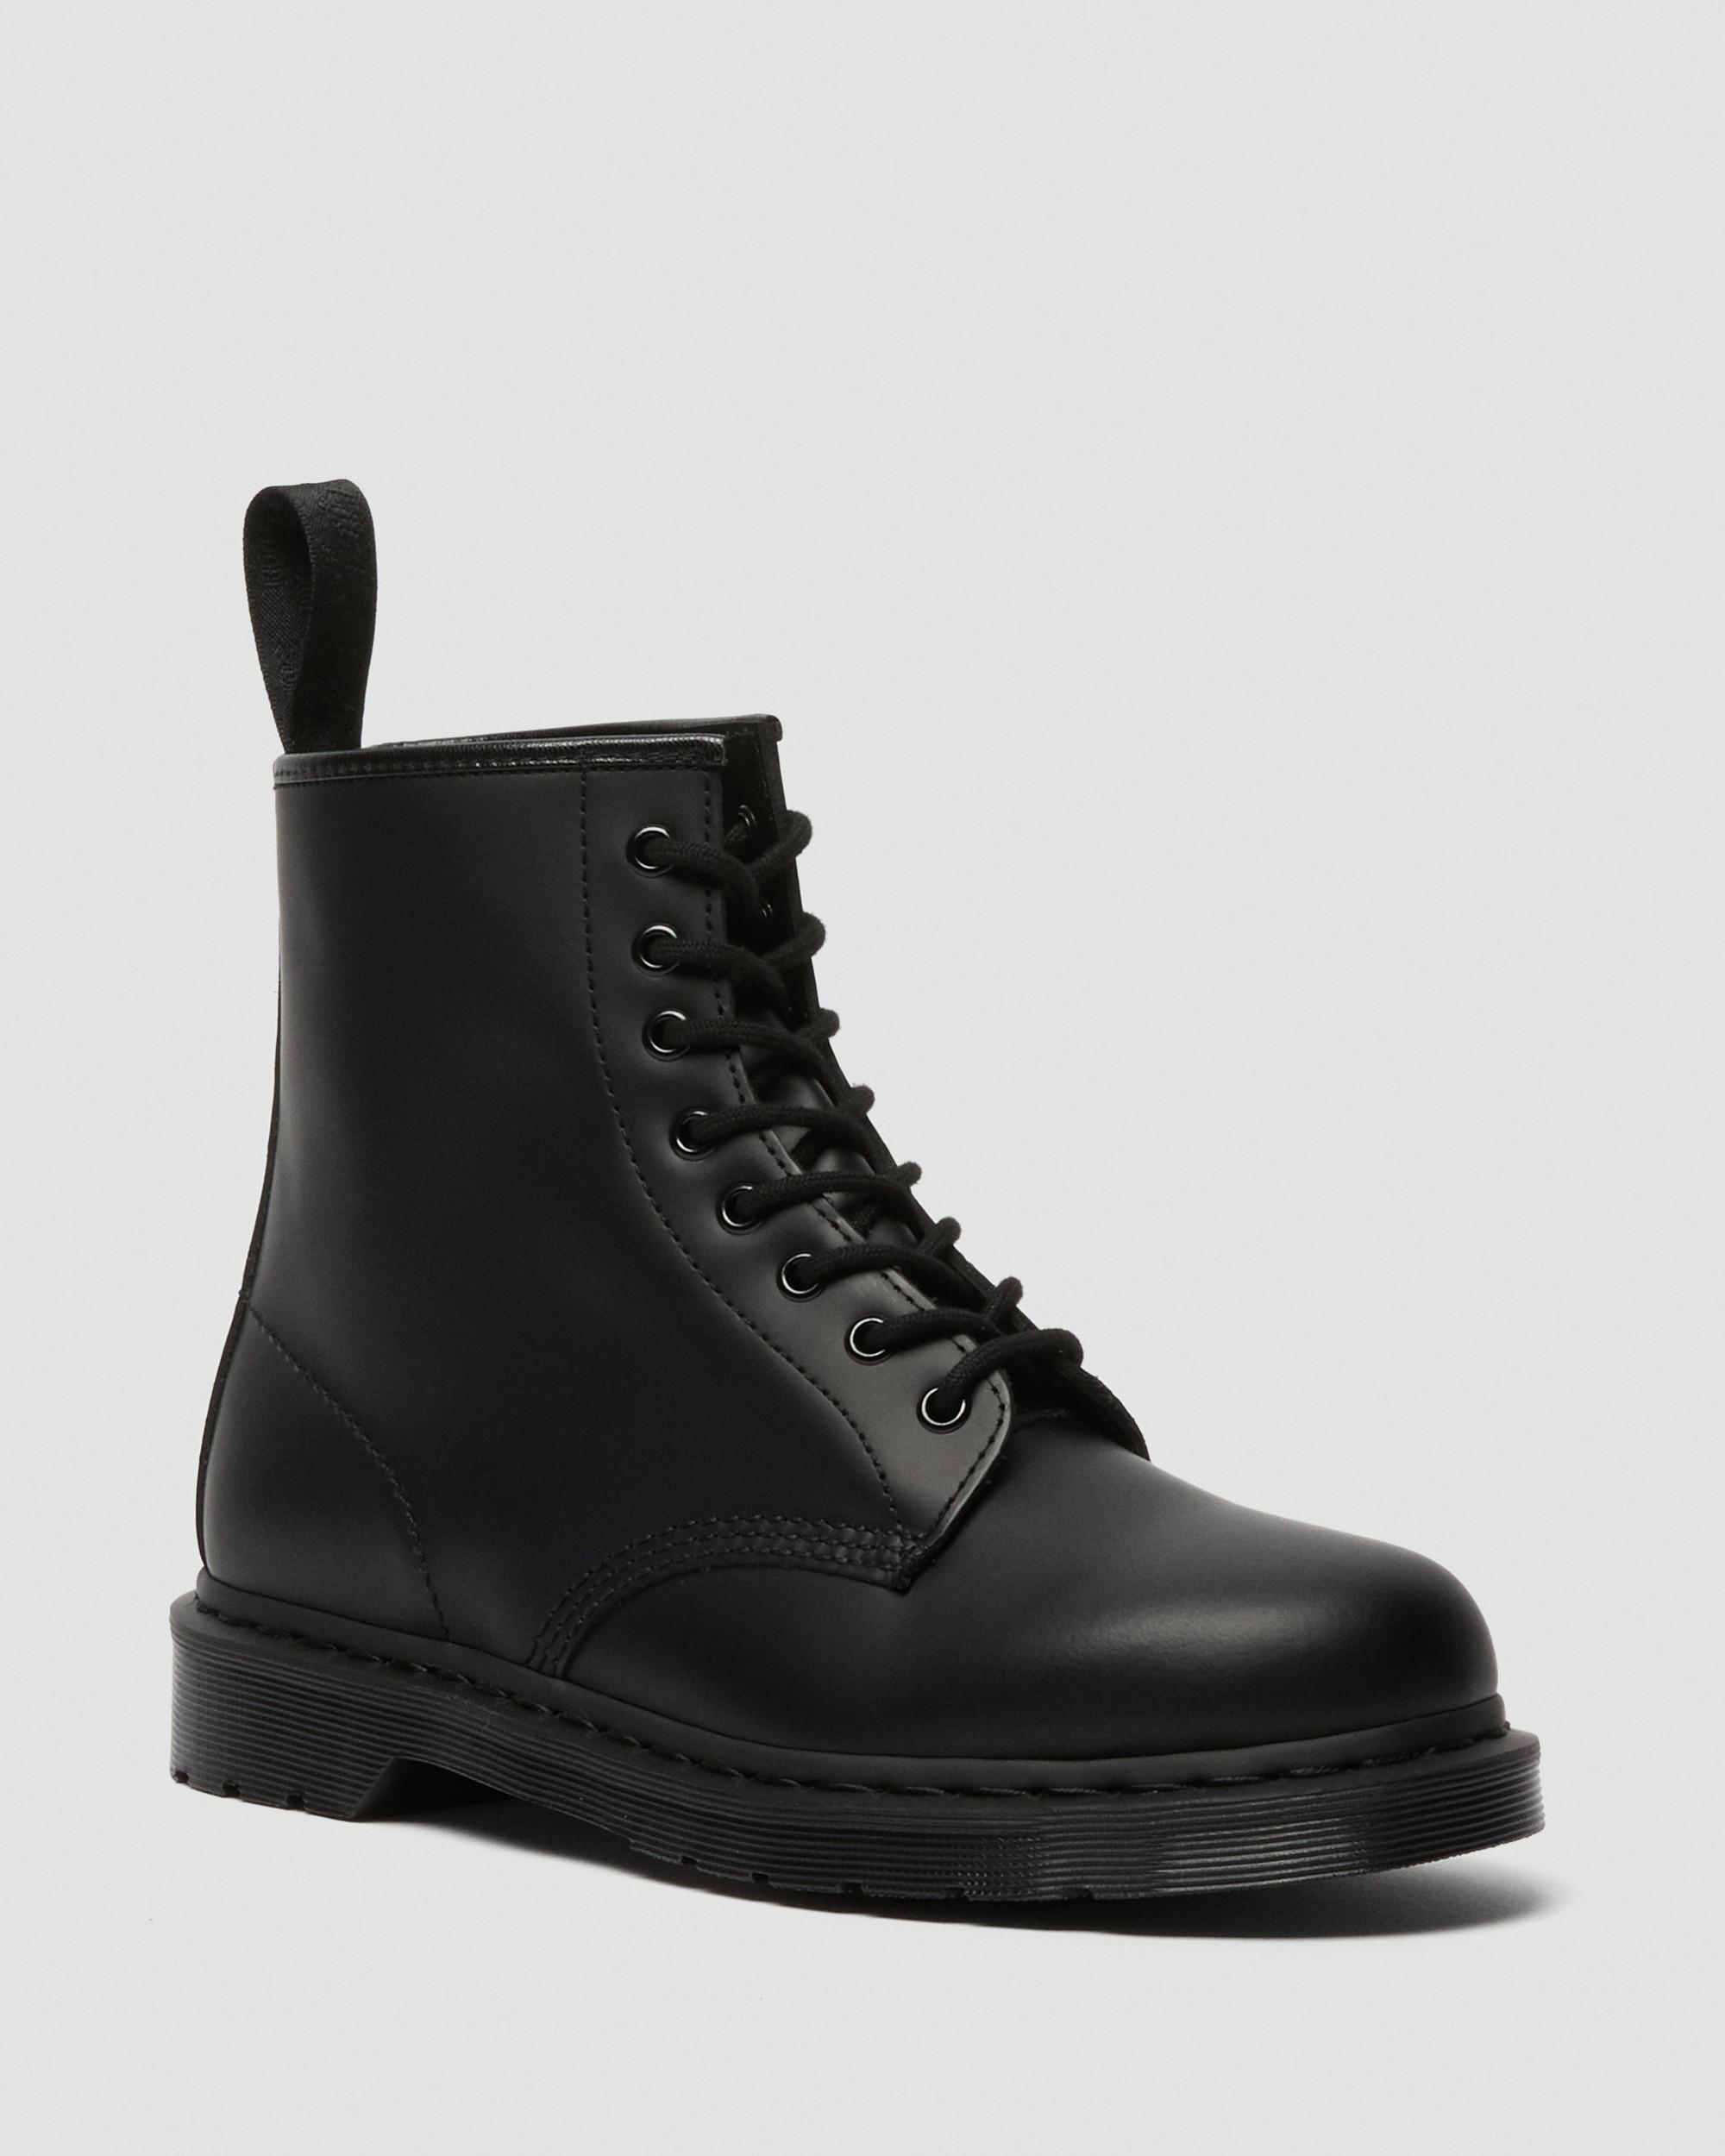 DR MARTENS 1460 Mono Smooth Leather Lace Up Boots